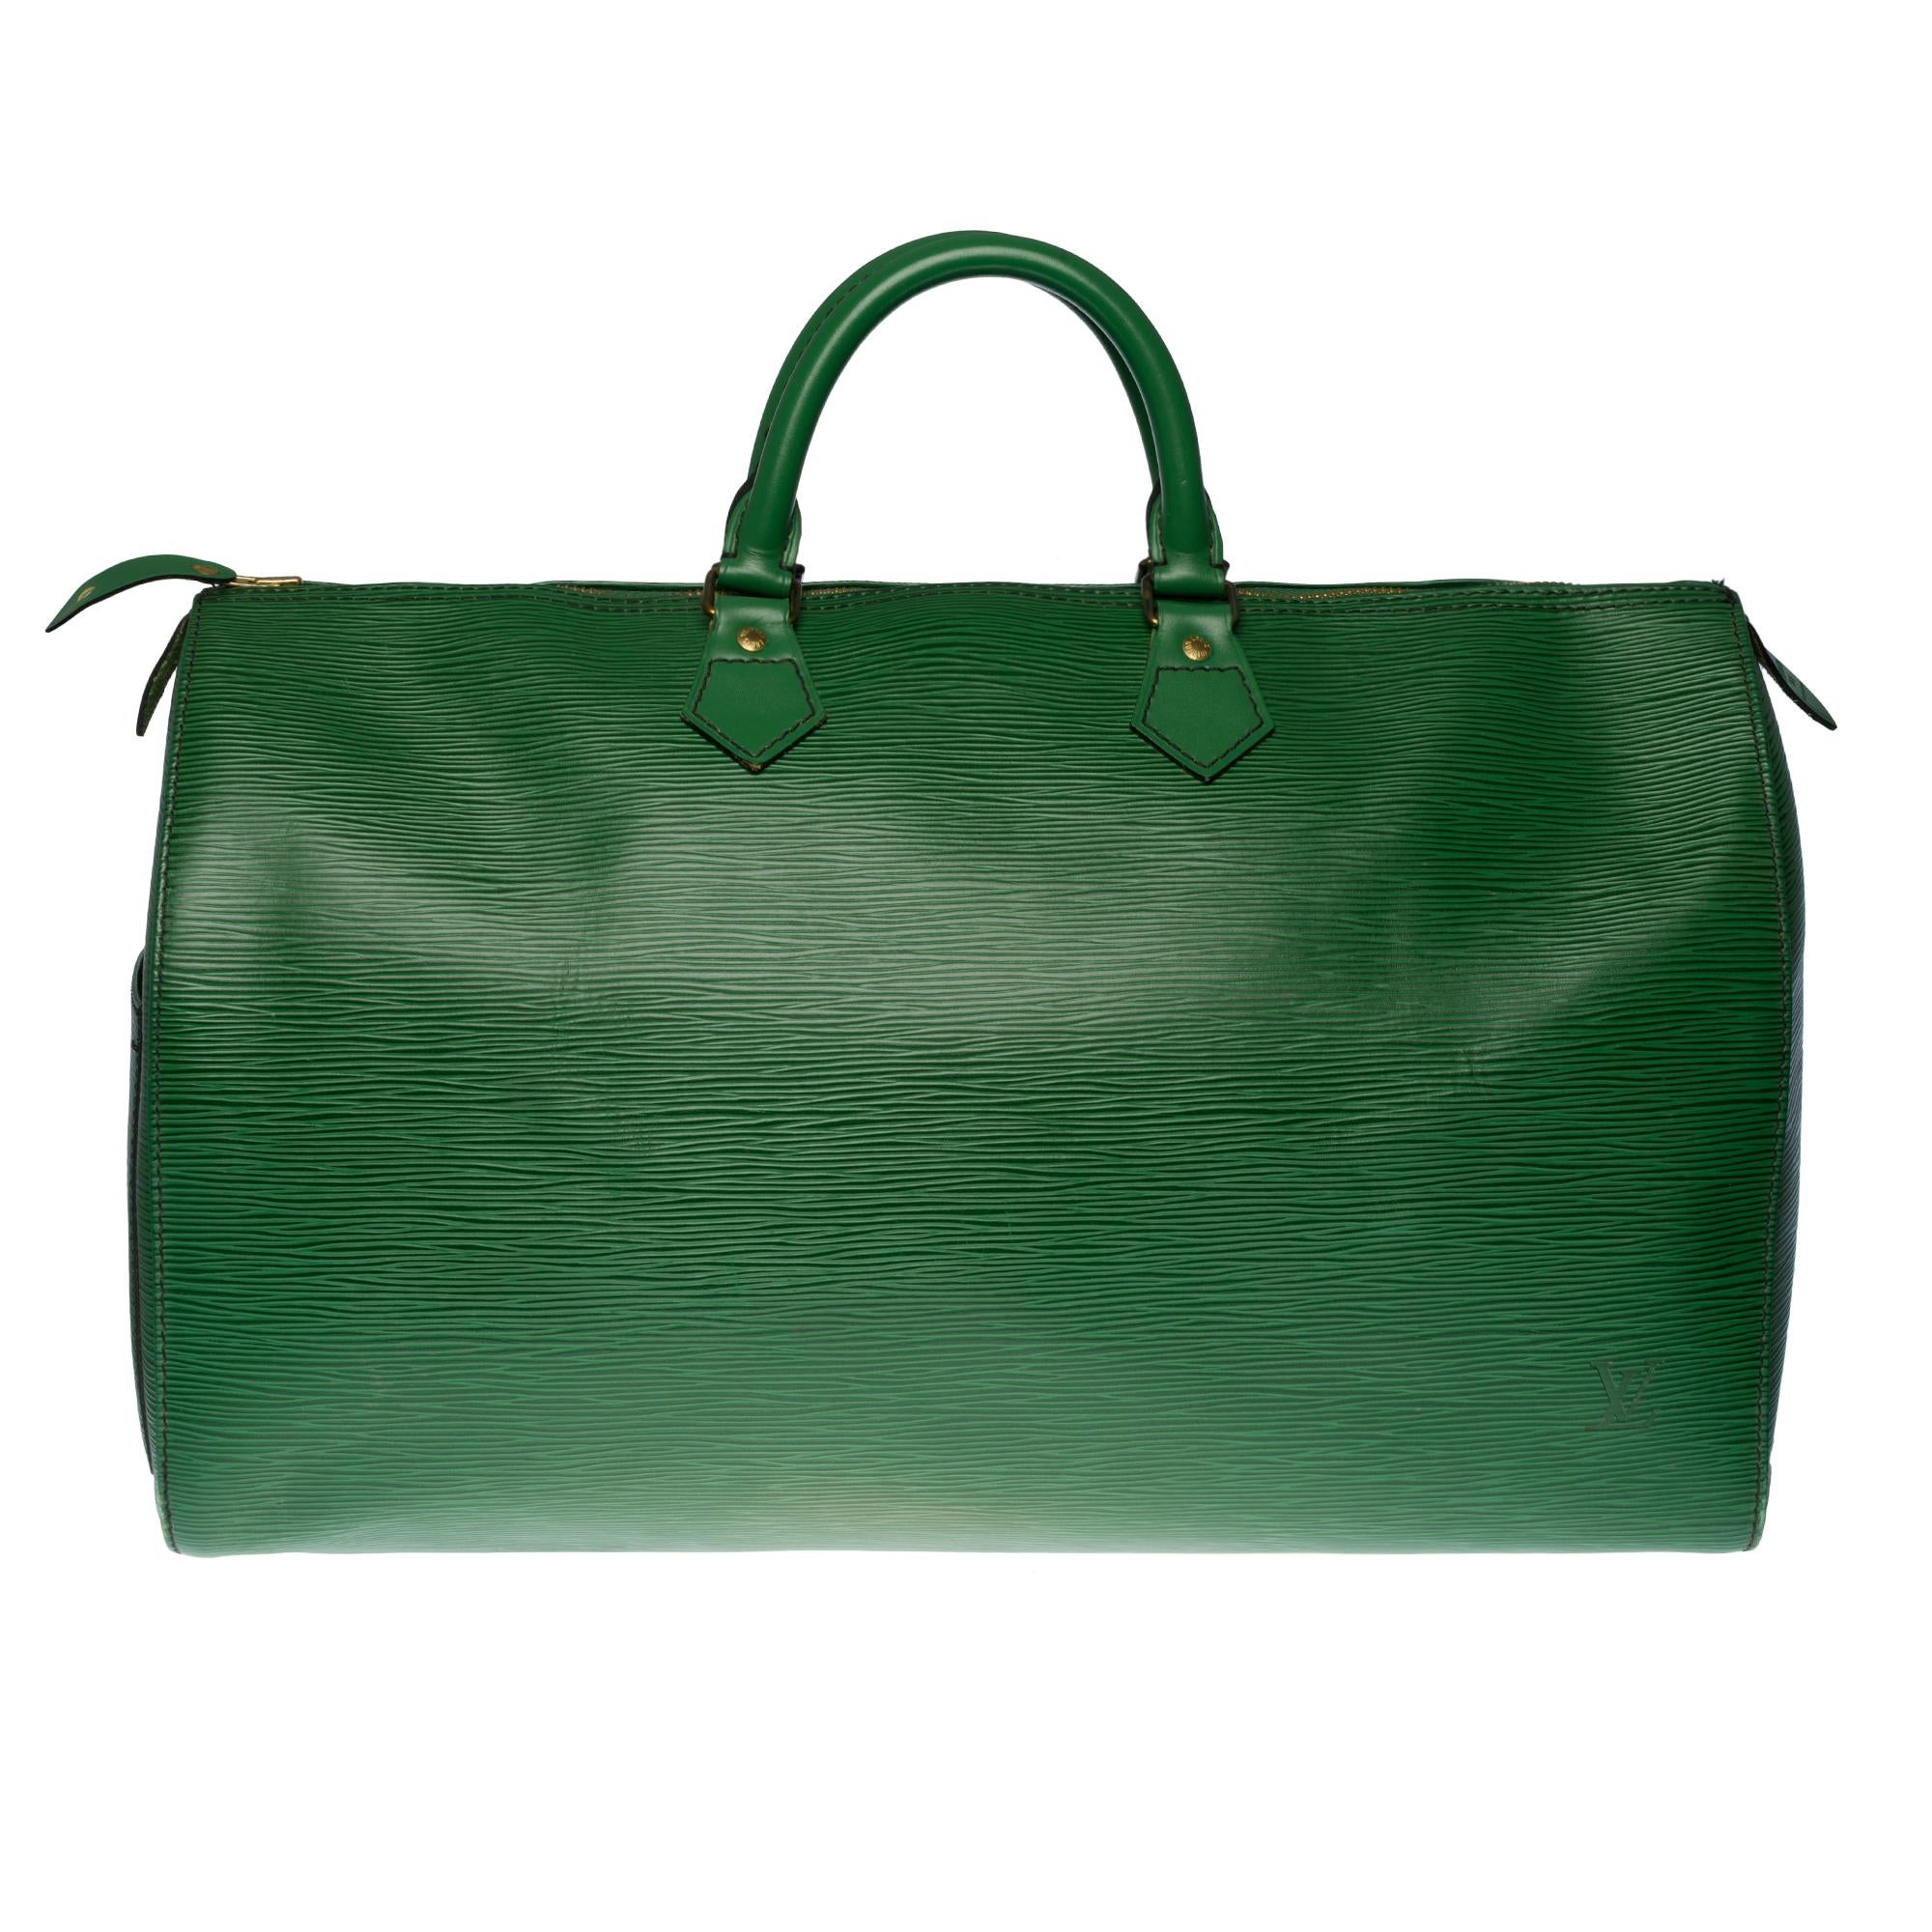 Beautiful Louis Vuitton Speedy 40 handbag in green epi leather.
Gold-tone metal hardware, double leather handle for a hand carry.
Double zip closure.
Interior in green suede.
Signature: 